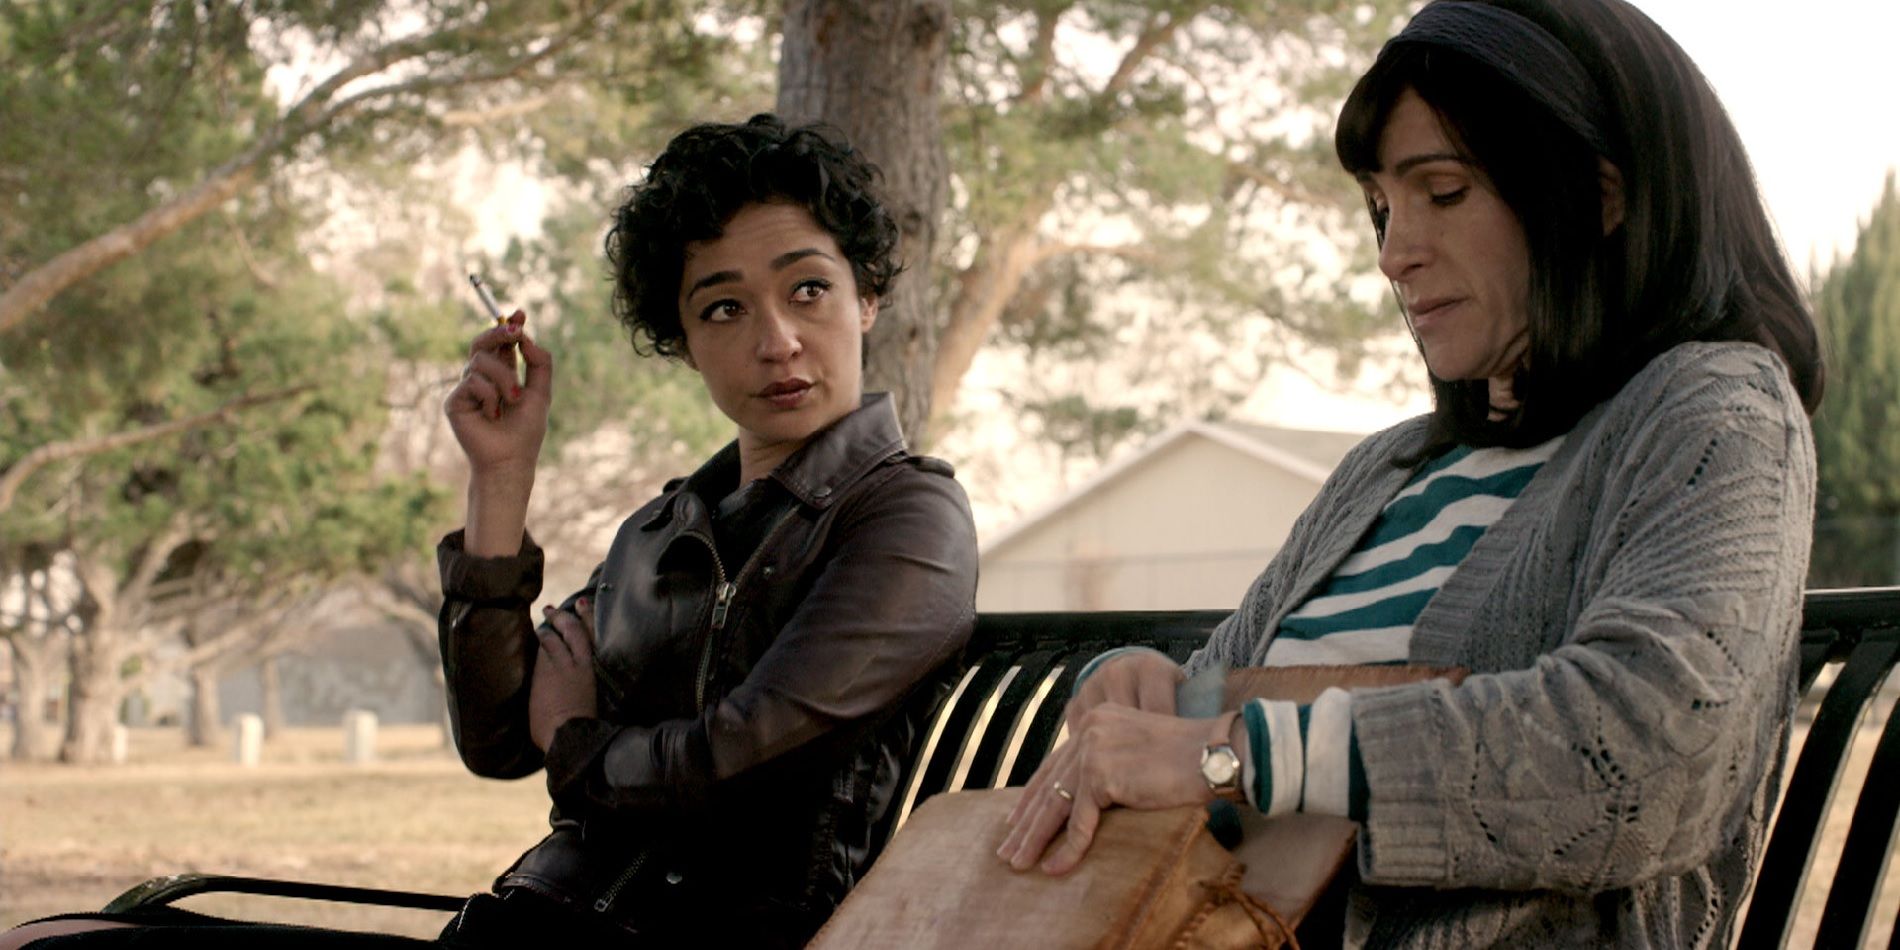 Tulip and Danni making an exchange in The Possibilities in Preacher